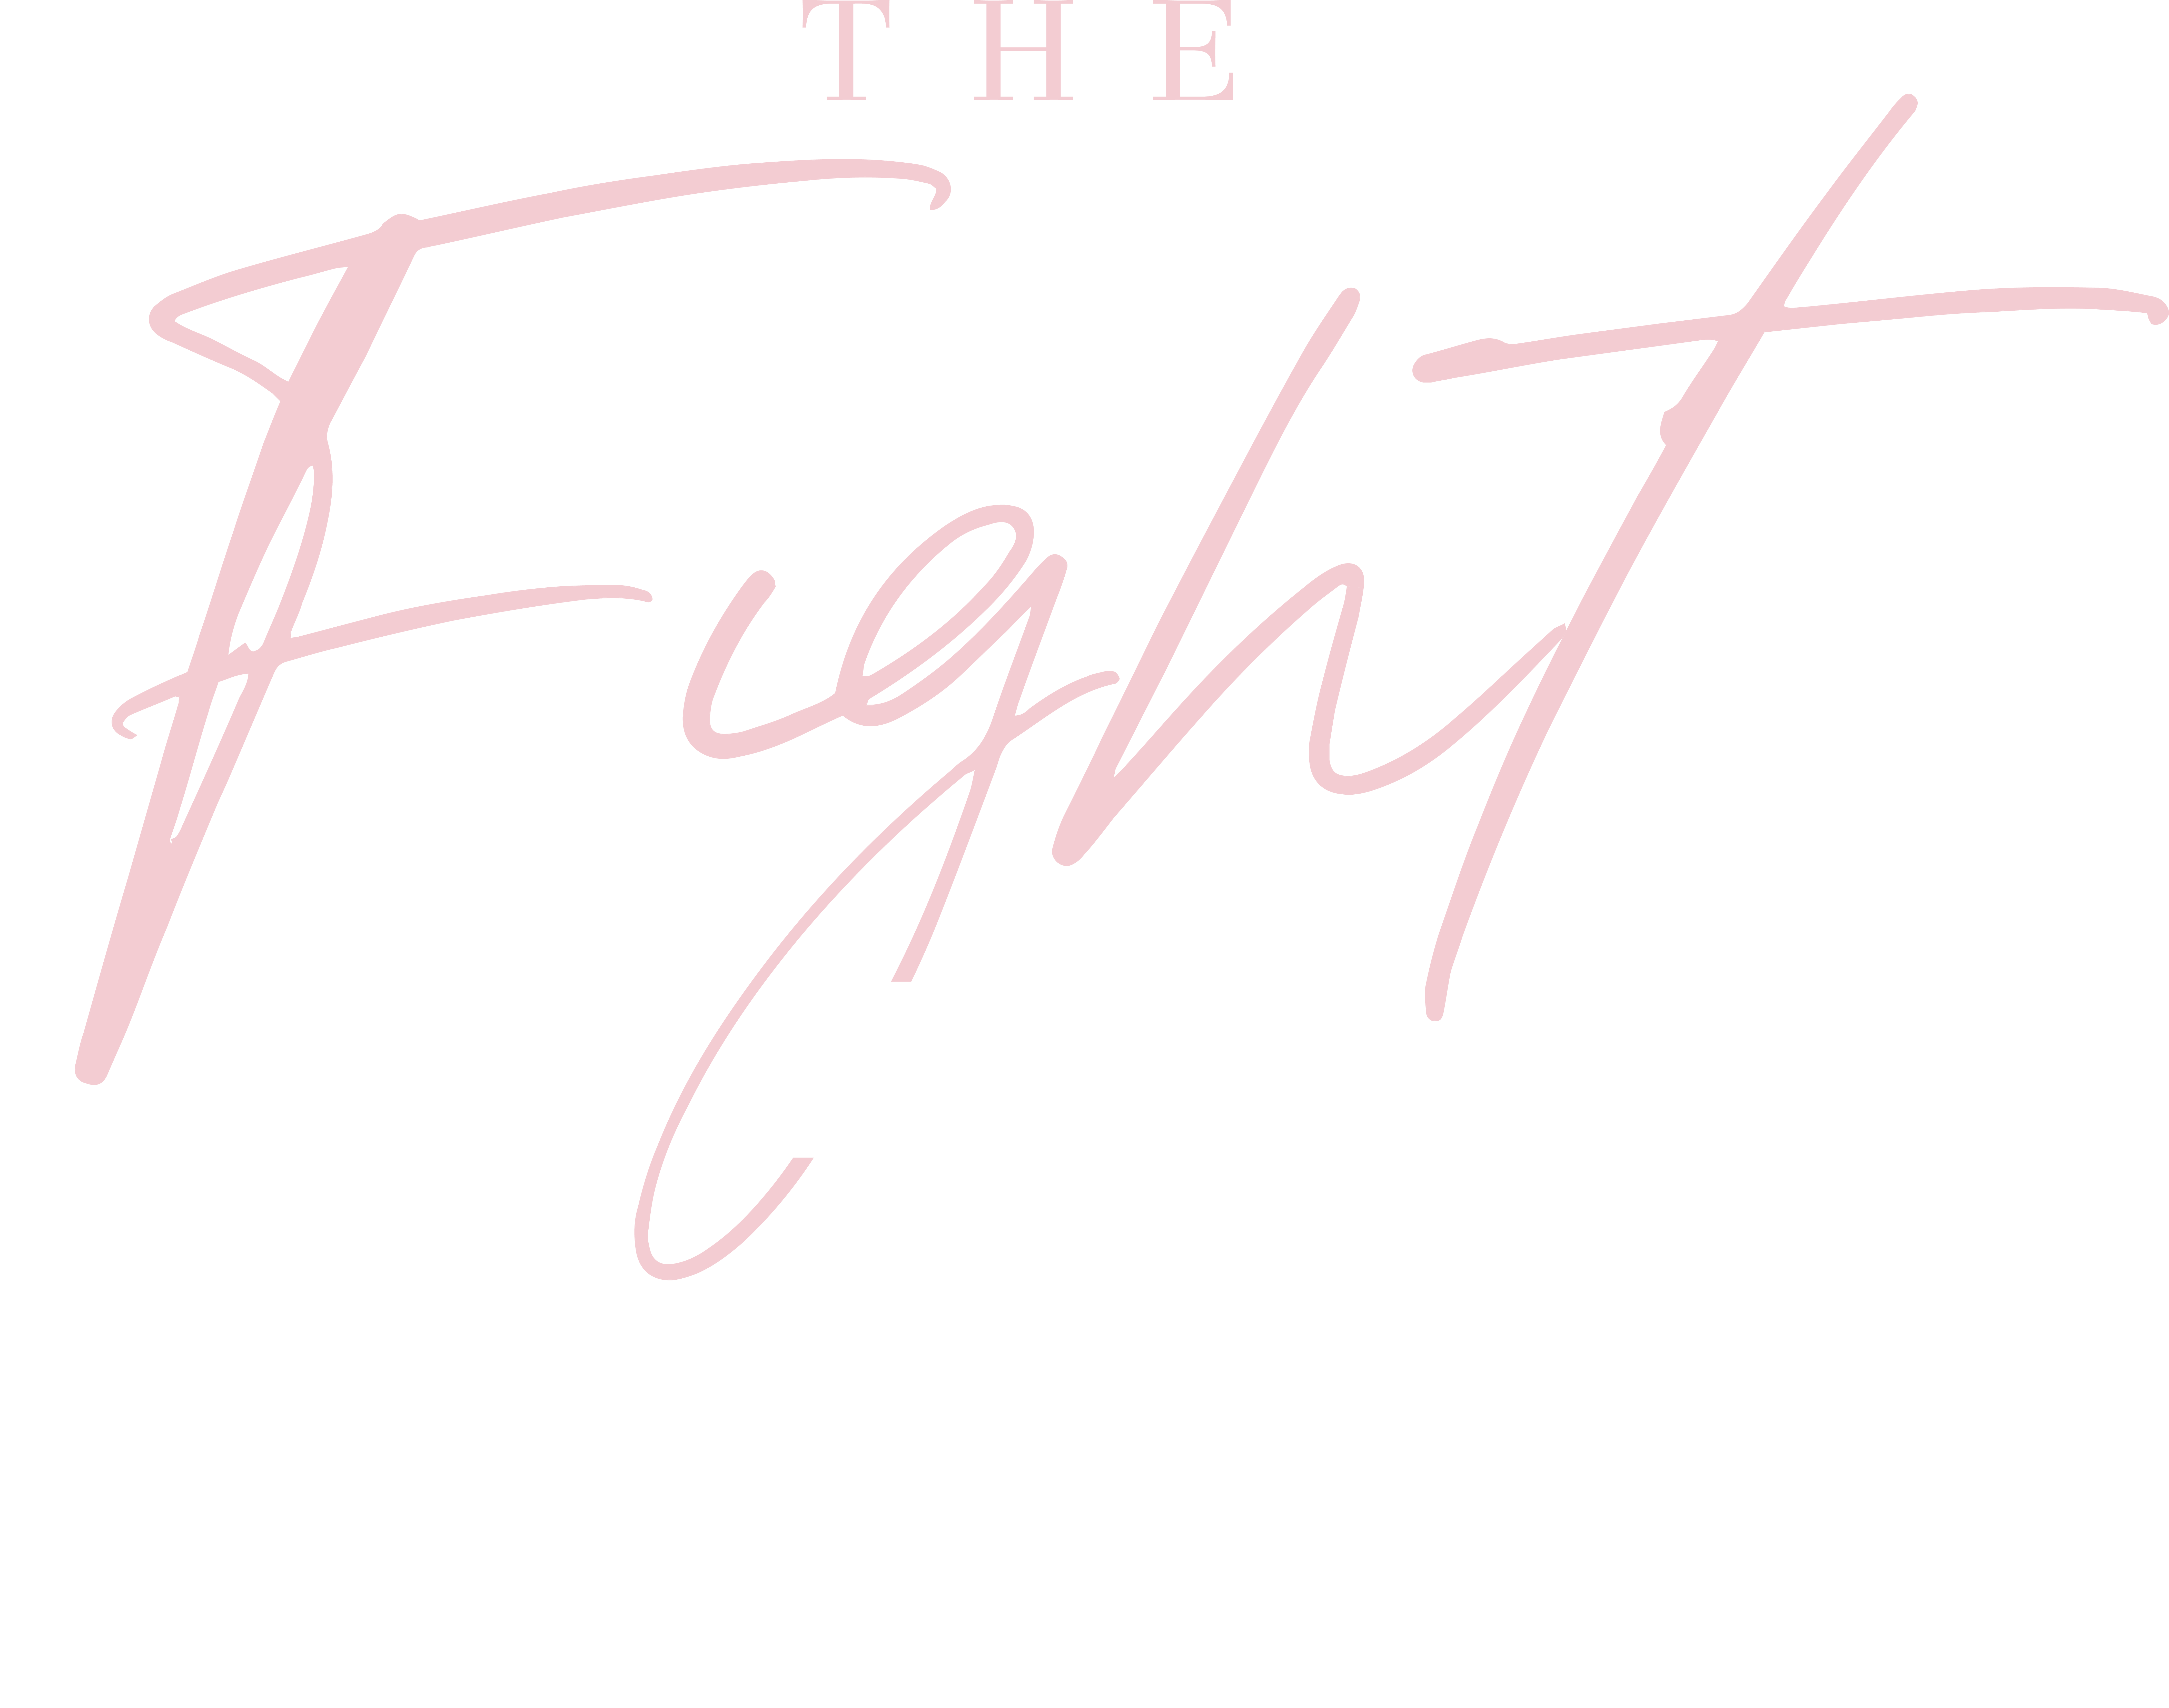 Fight for Female by Lisa Bevere